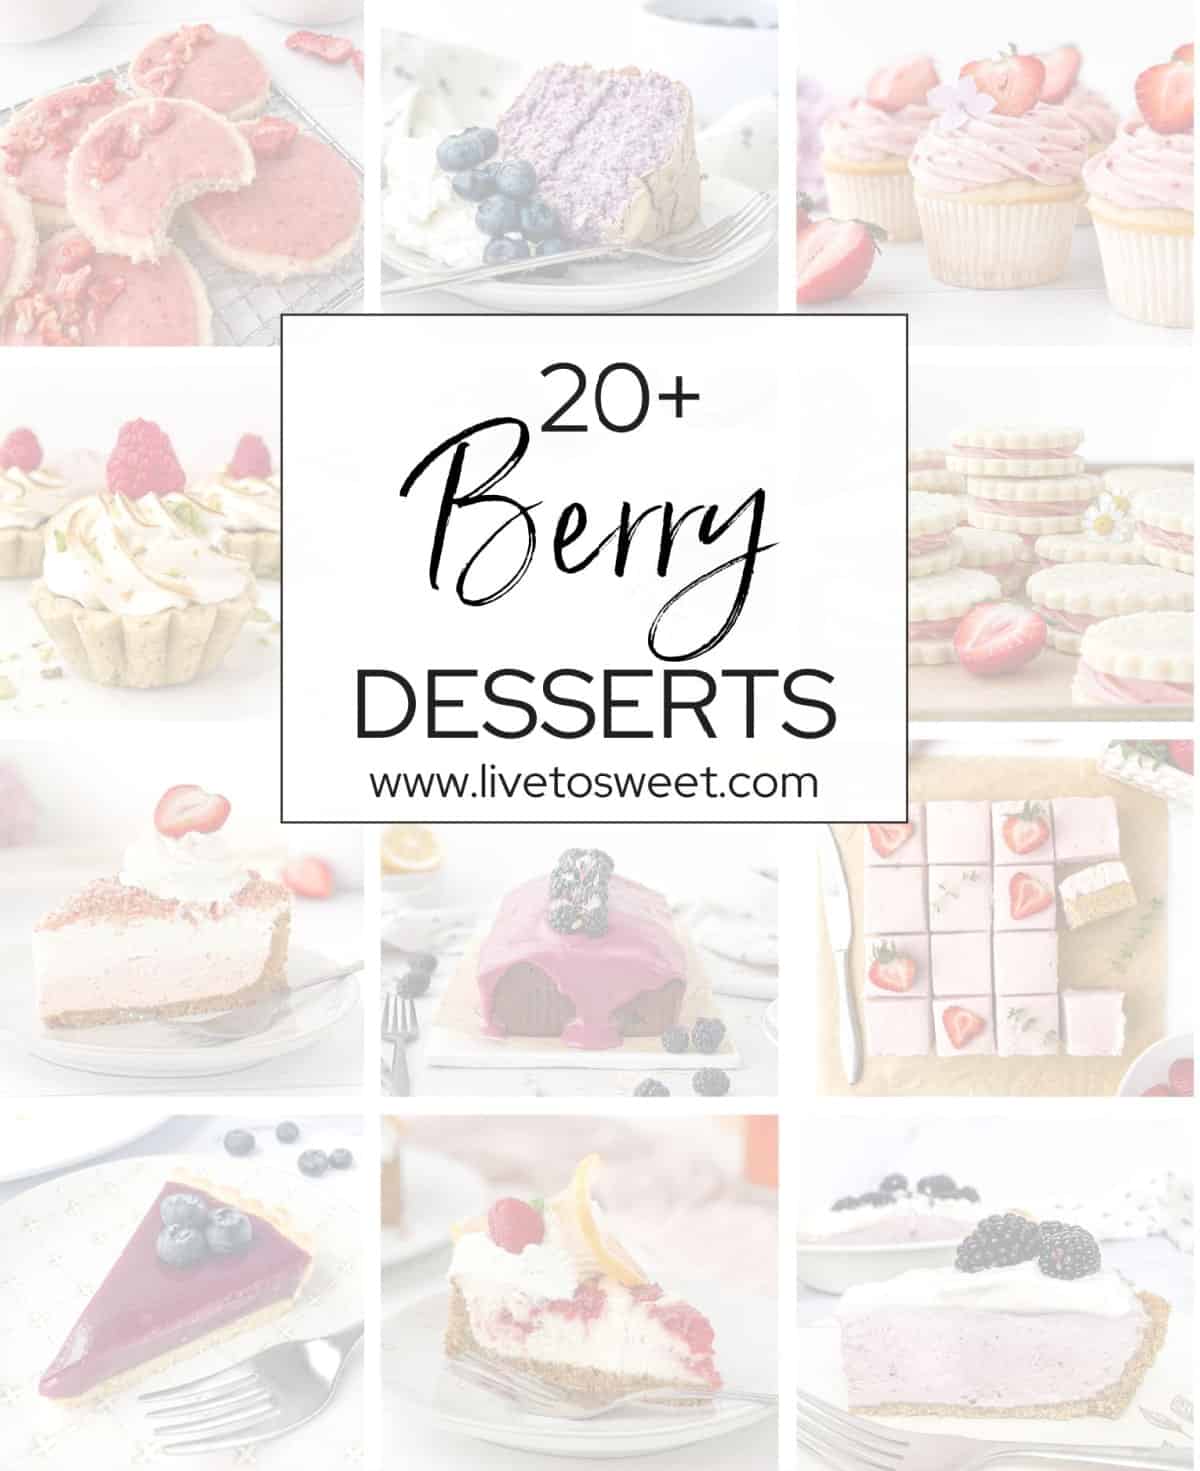 Collage of berry desserts.